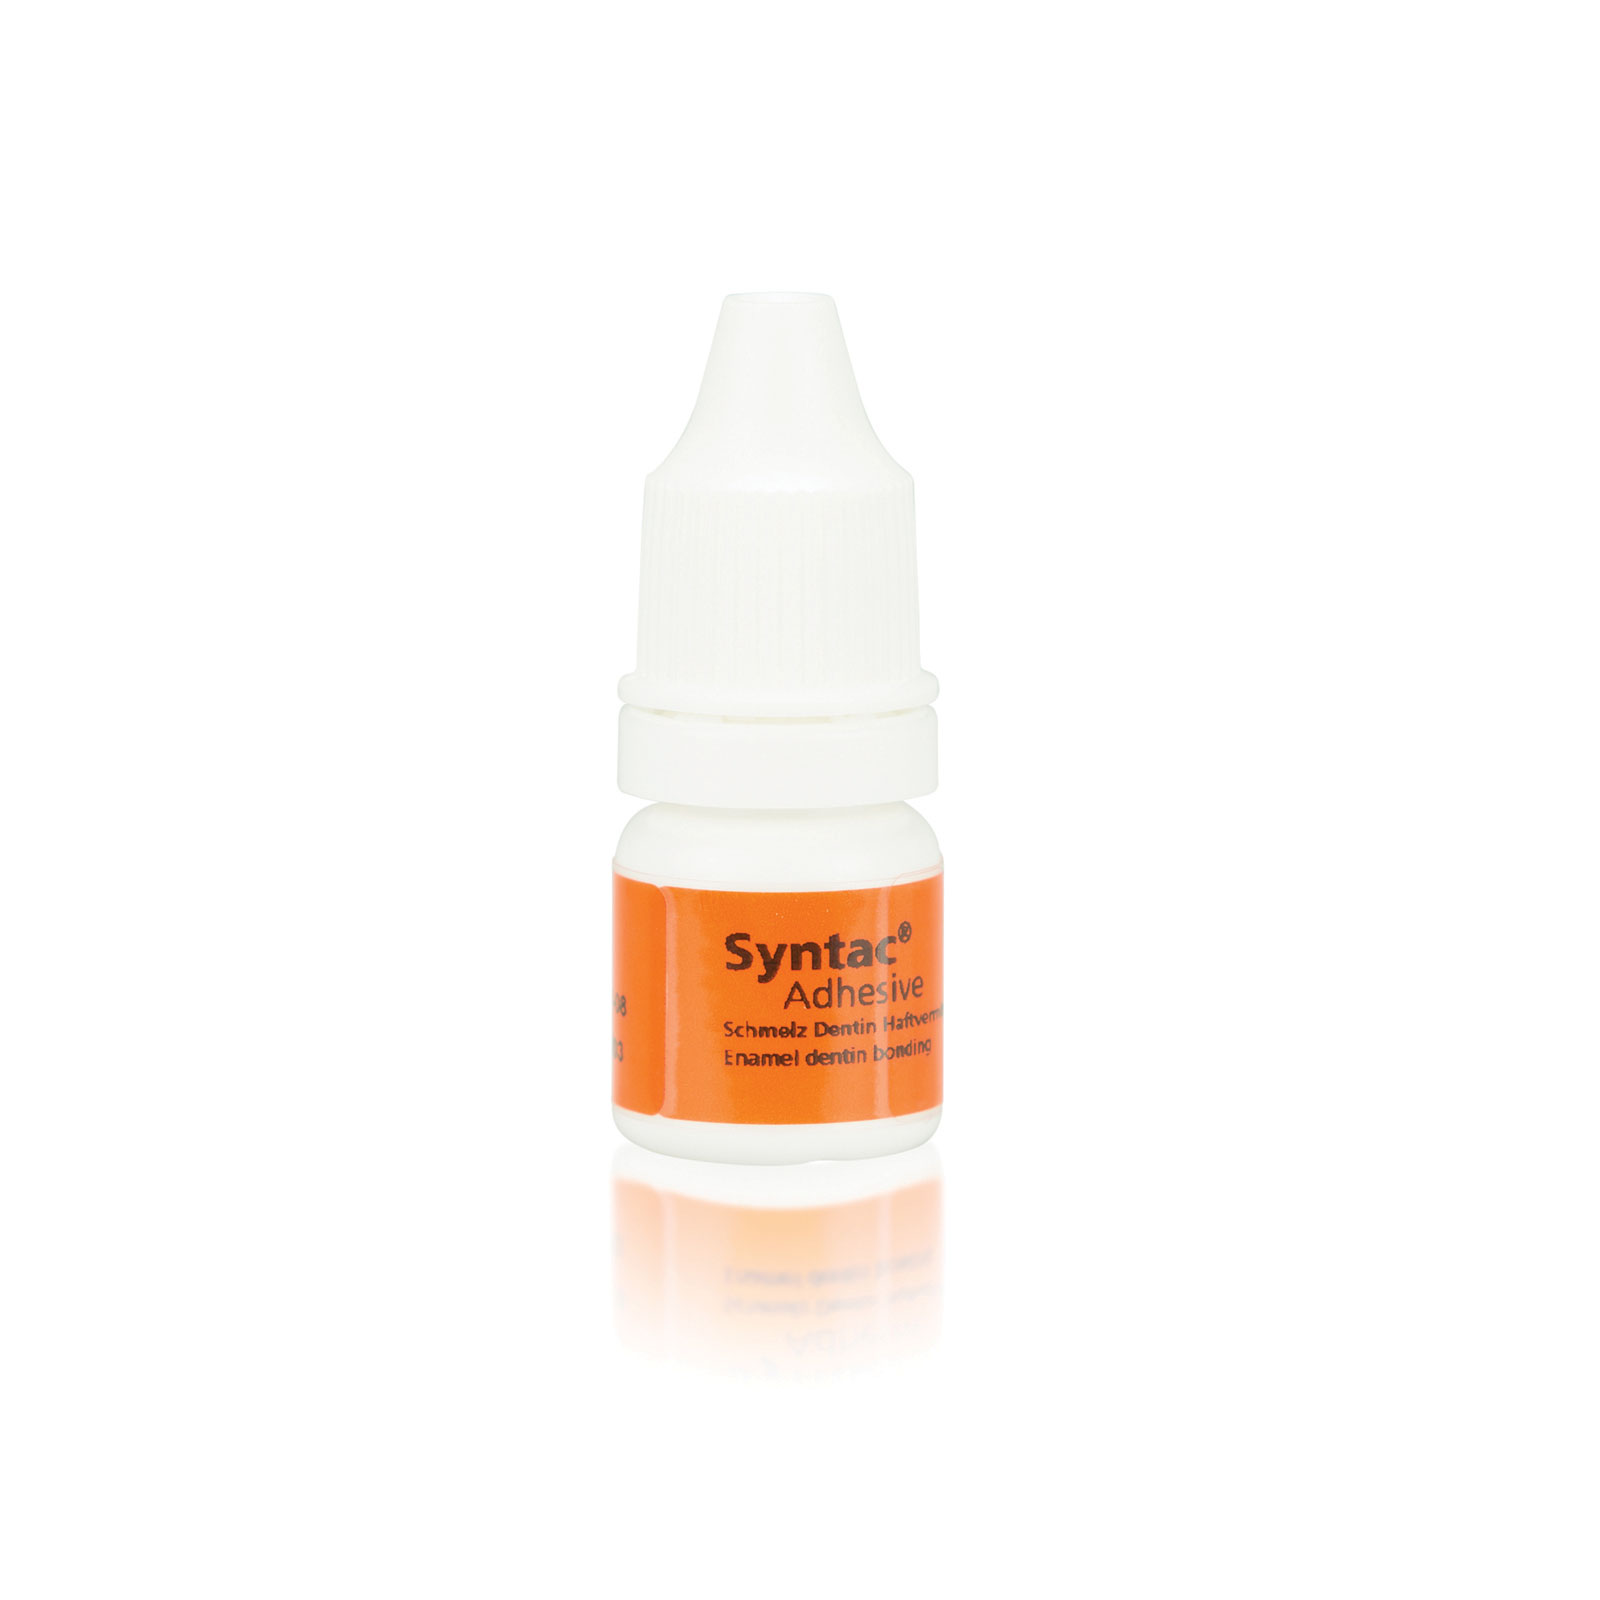 Syntac Adhesive Refill 3g.